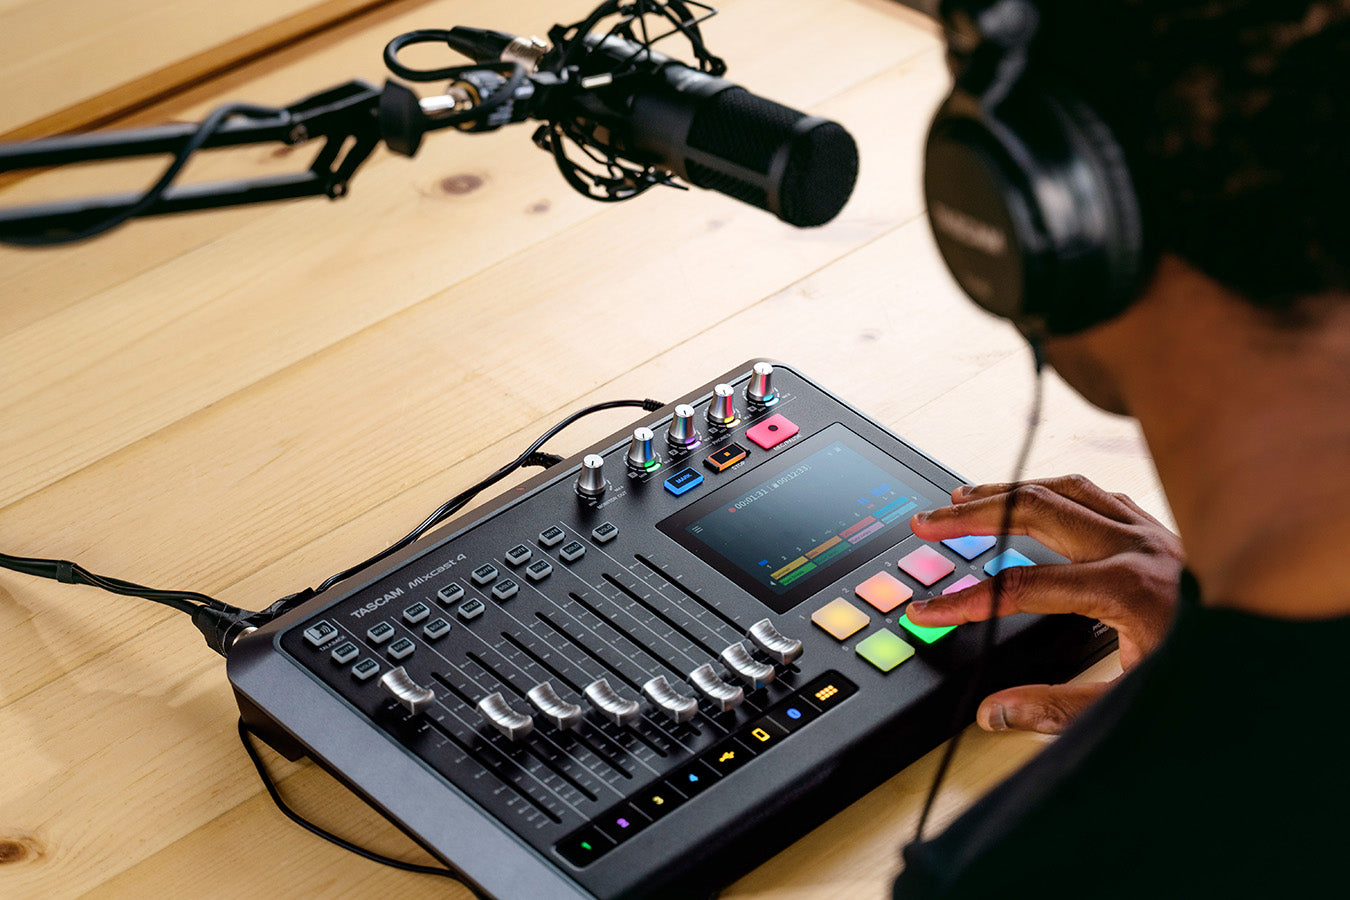 Tascam Mixcast 4 - Podcast Station with Recorder/USB Audio Interface, shown in a home studio